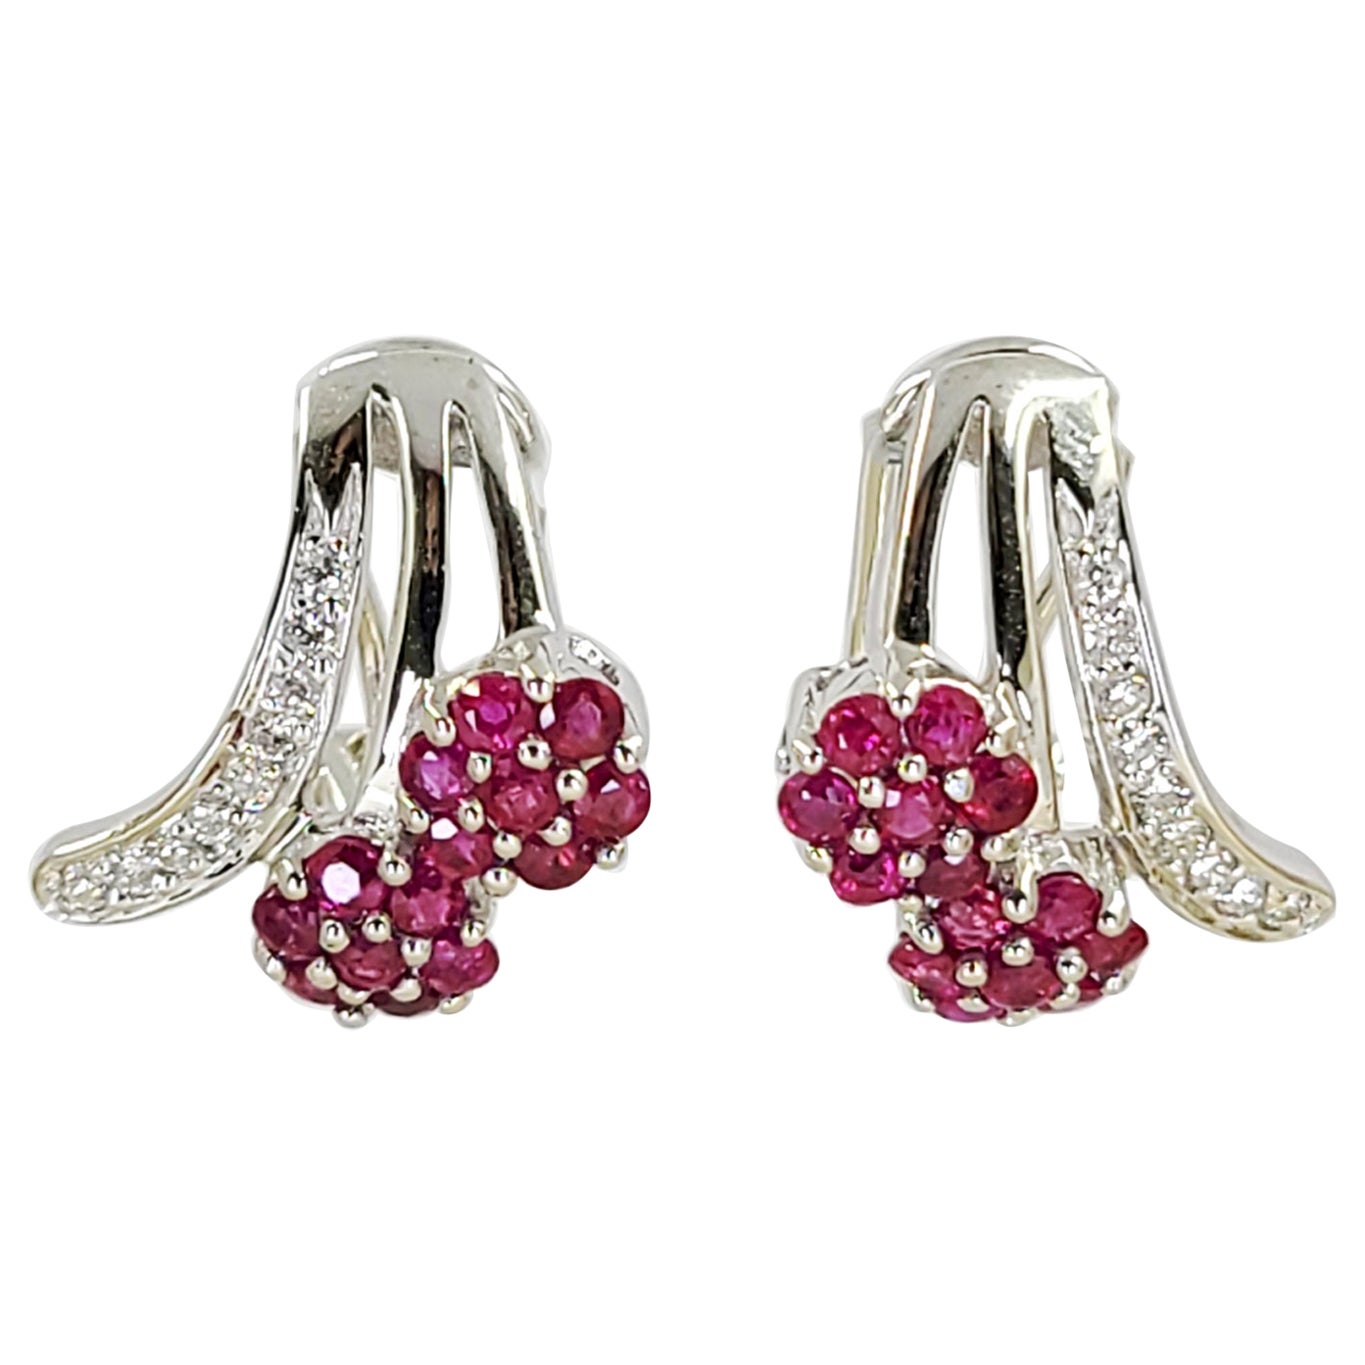 White Gold, Diamond, and Ruby Cluster Earrings For Sale at 1stDibs